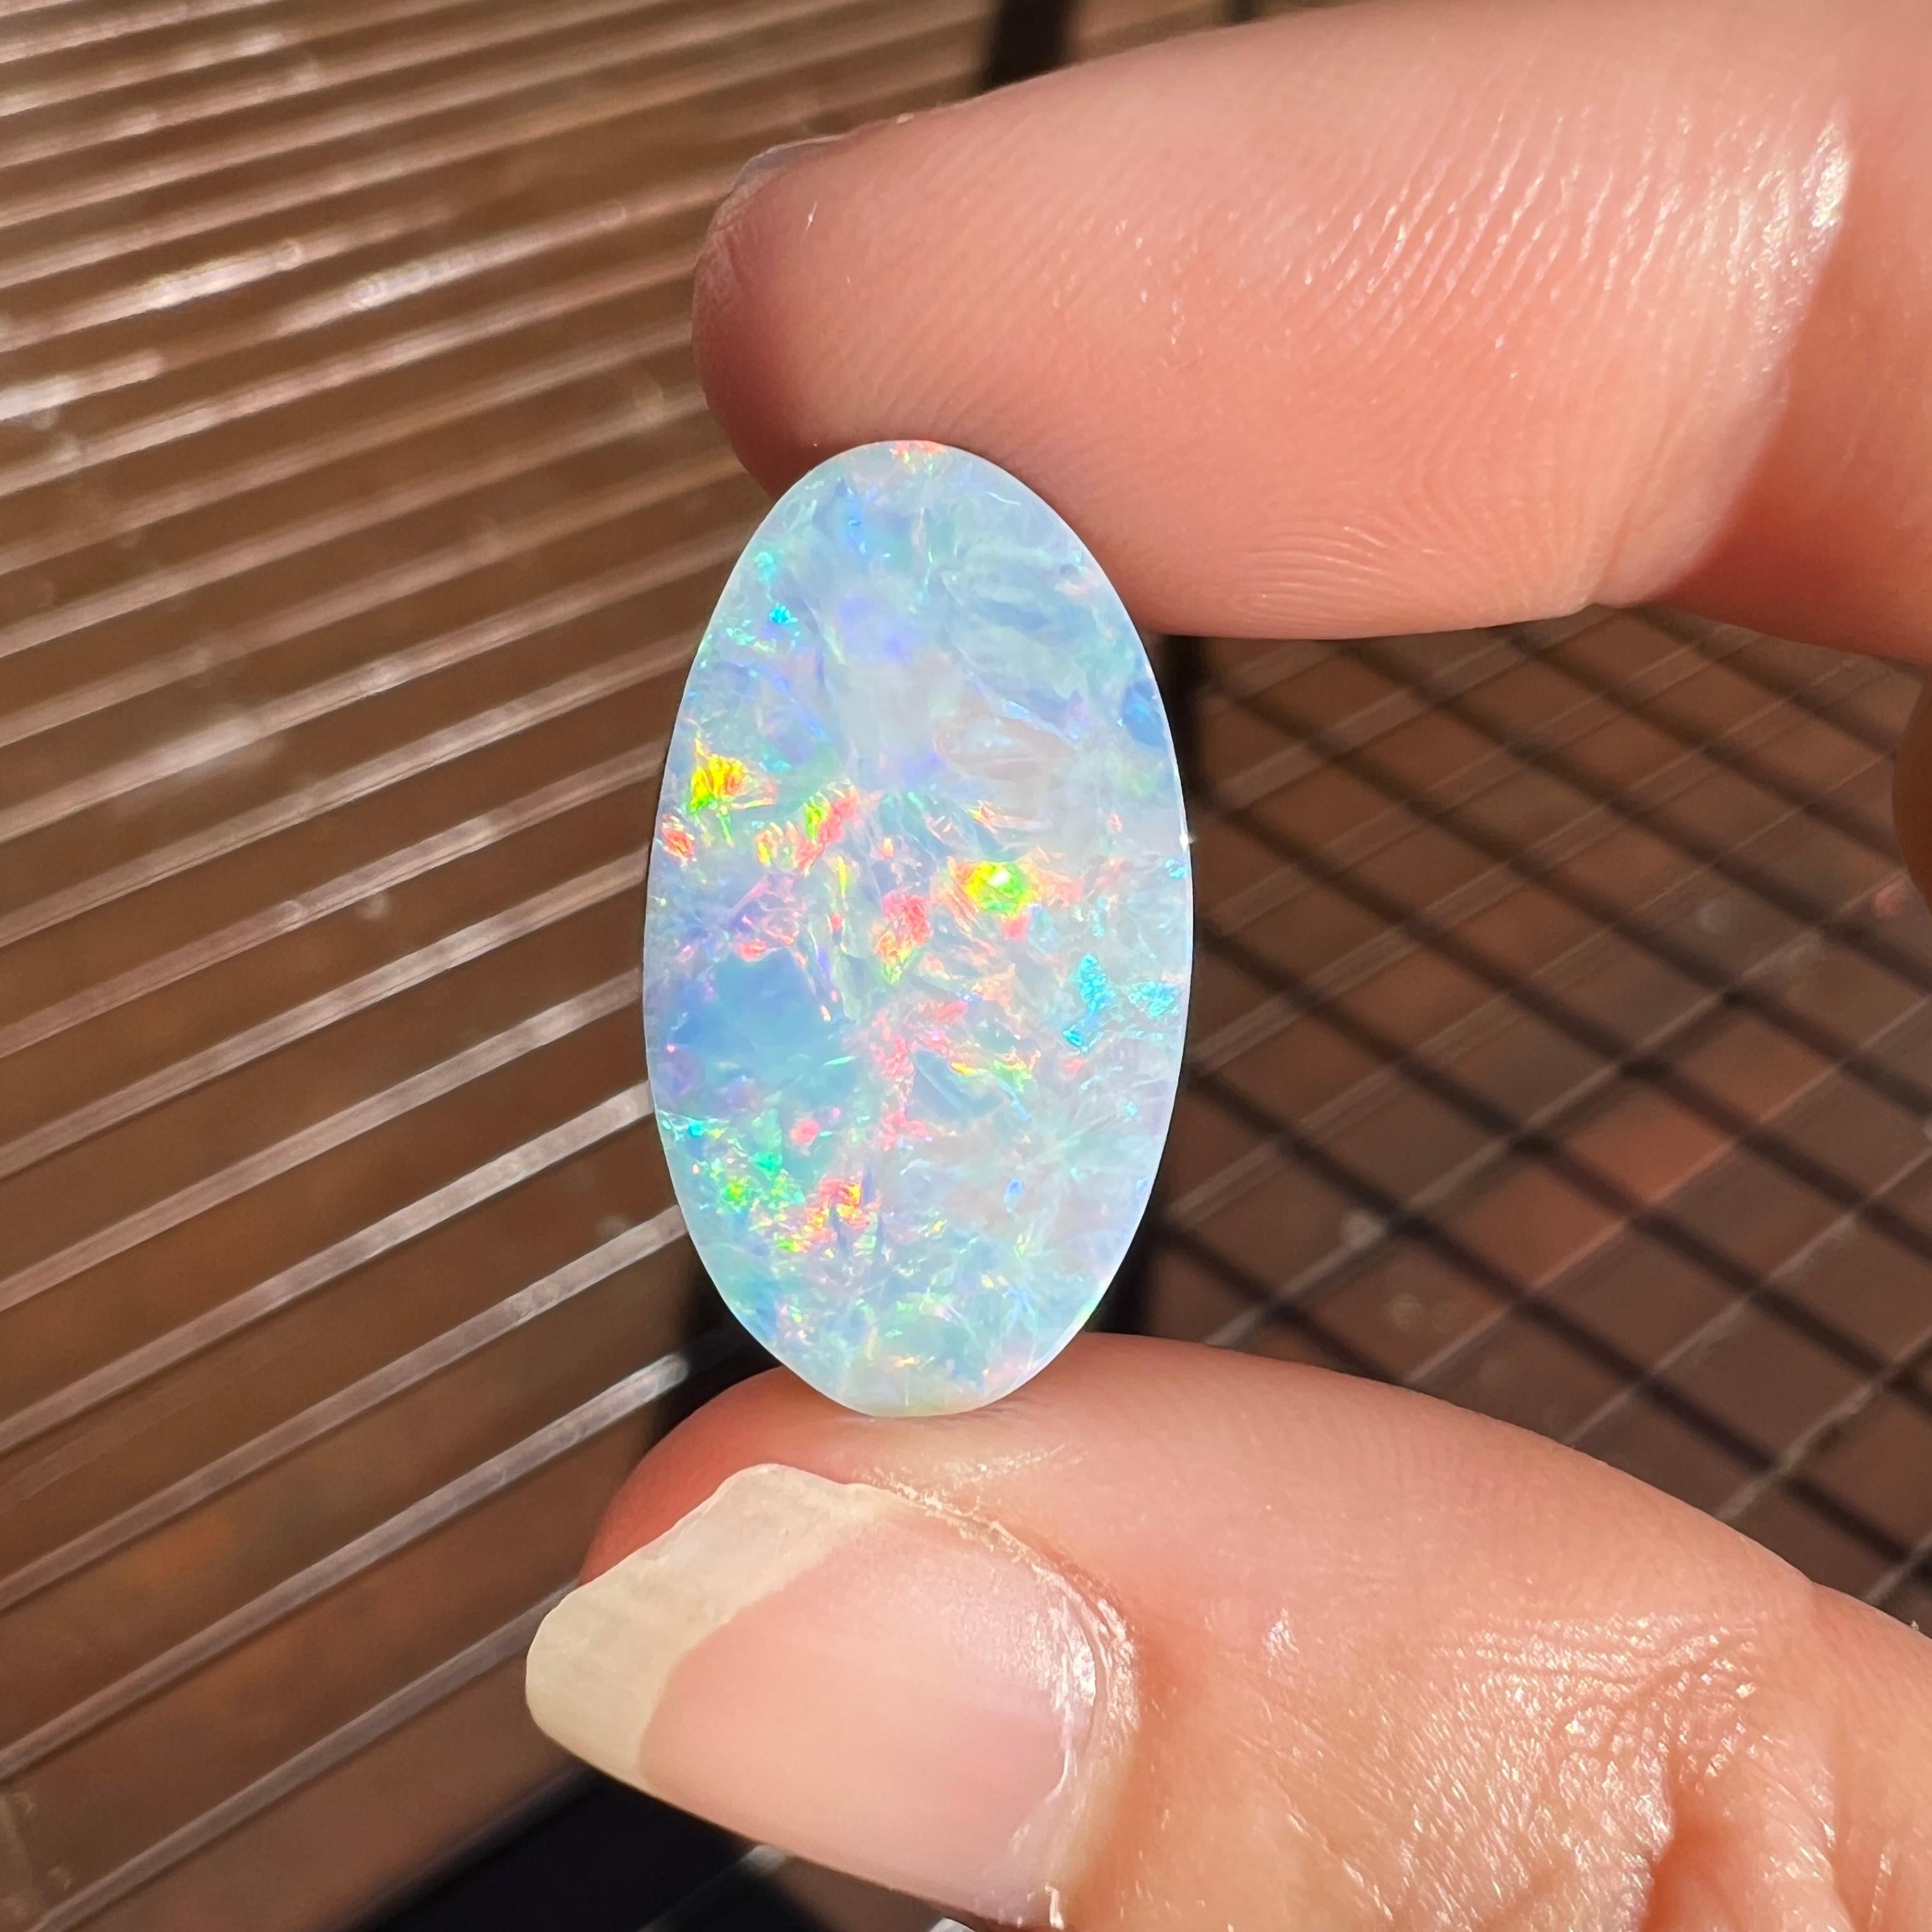 This beautiful 11.52 Ct Australian boulder opal was mined by Sue Cooper at her Yaraka opal mine in Western Queensland, Australia in 2021. Sue processed the rough opal herself and cut into into a classic oval shape. We love how this opal contains the